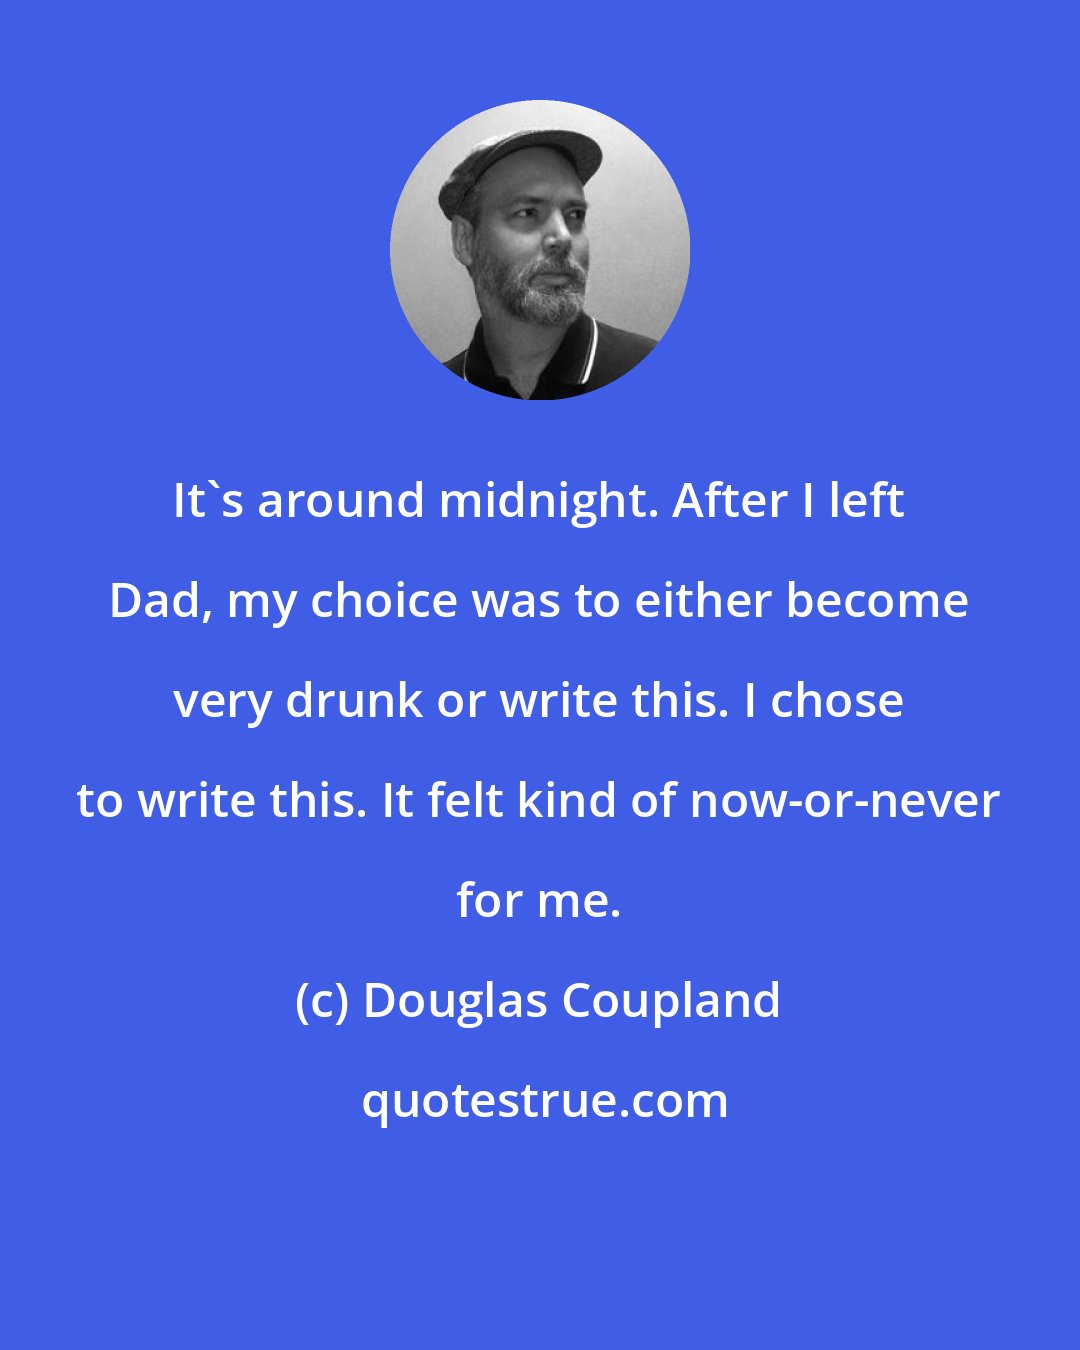 Douglas Coupland: It's around midnight. After I left Dad, my choice was to either become very drunk or write this. I chose to write this. It felt kind of now-or-never for me.